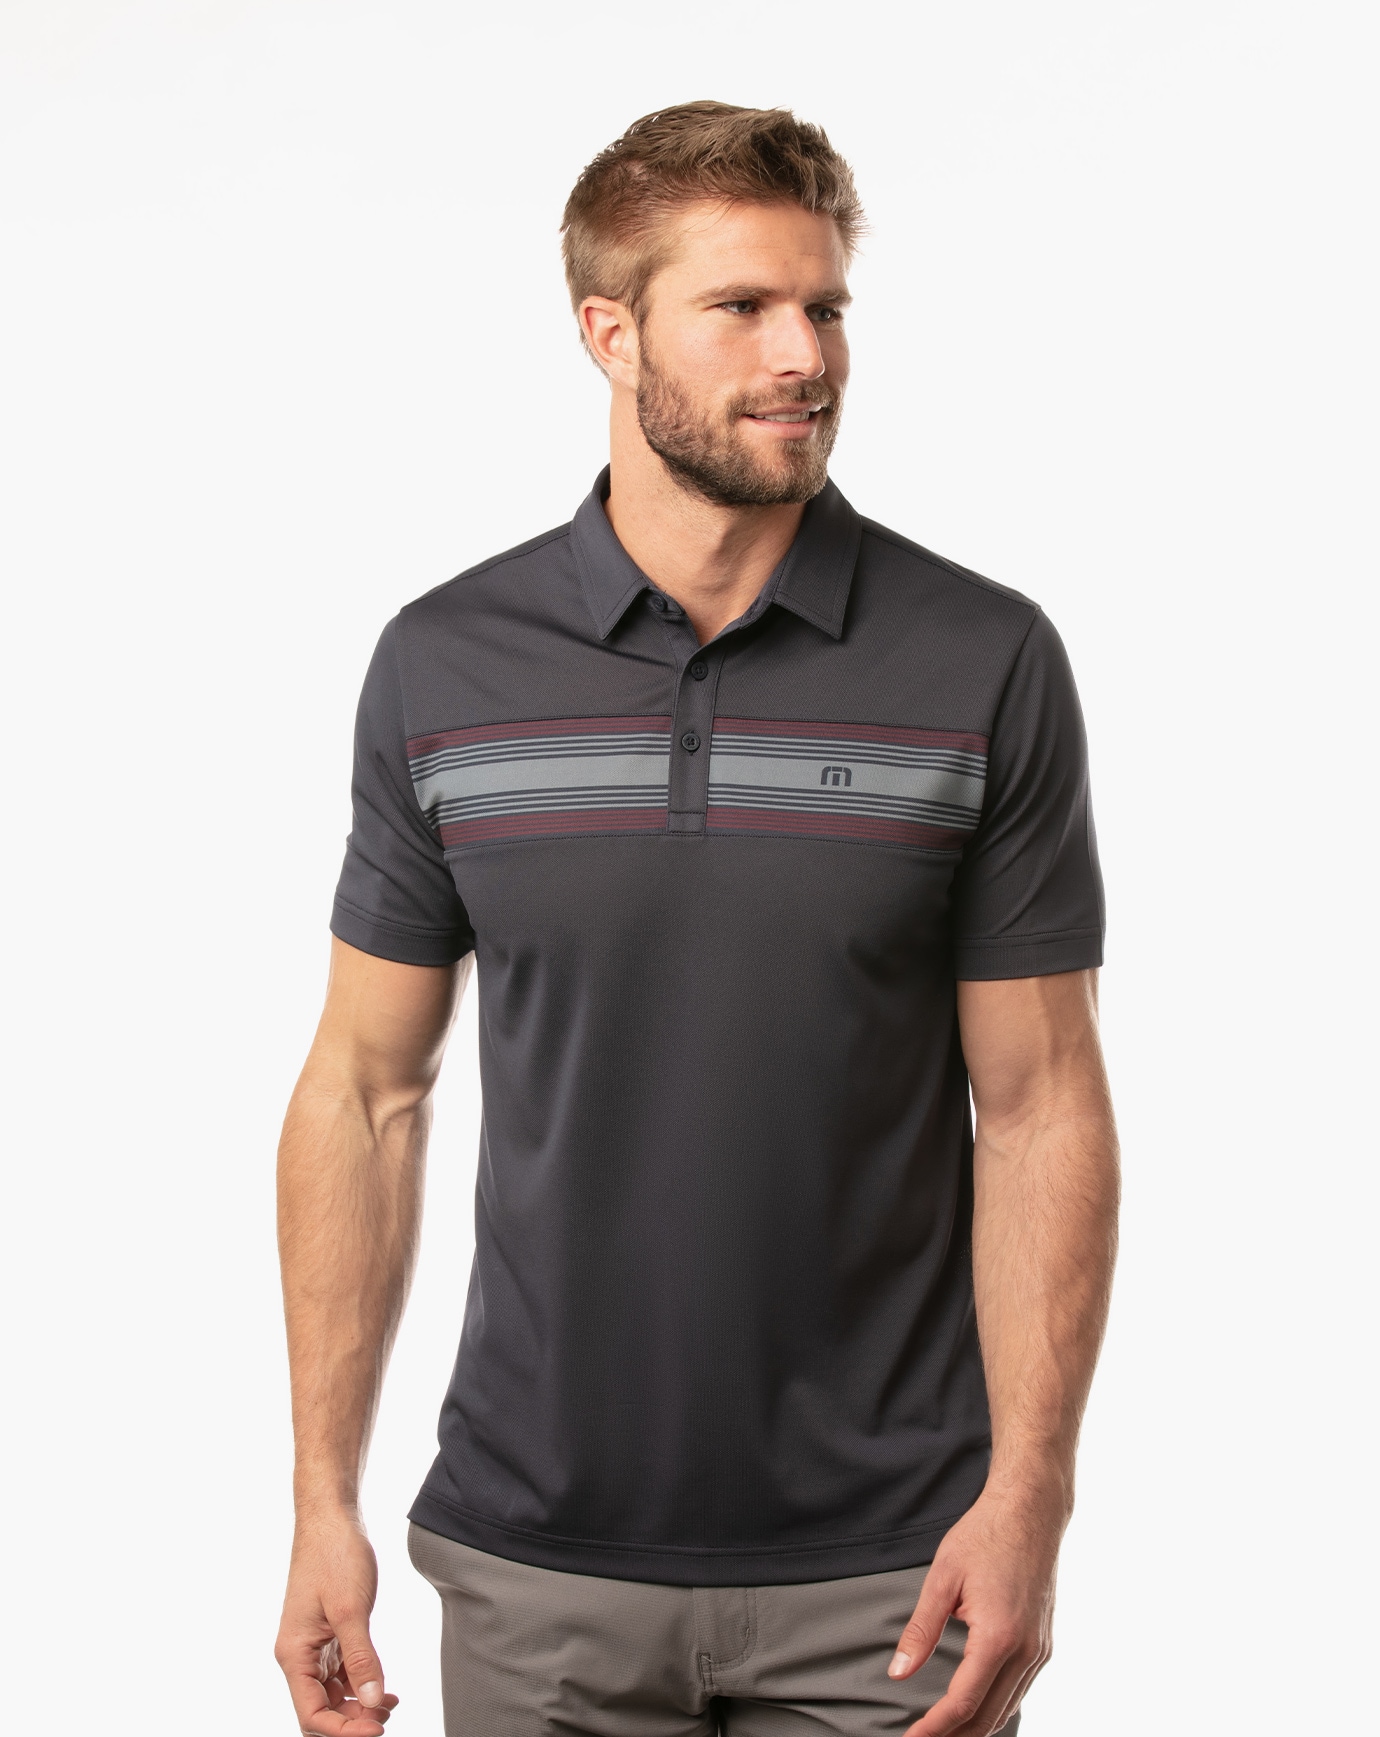 Related Product - ROUTE 85 POLO